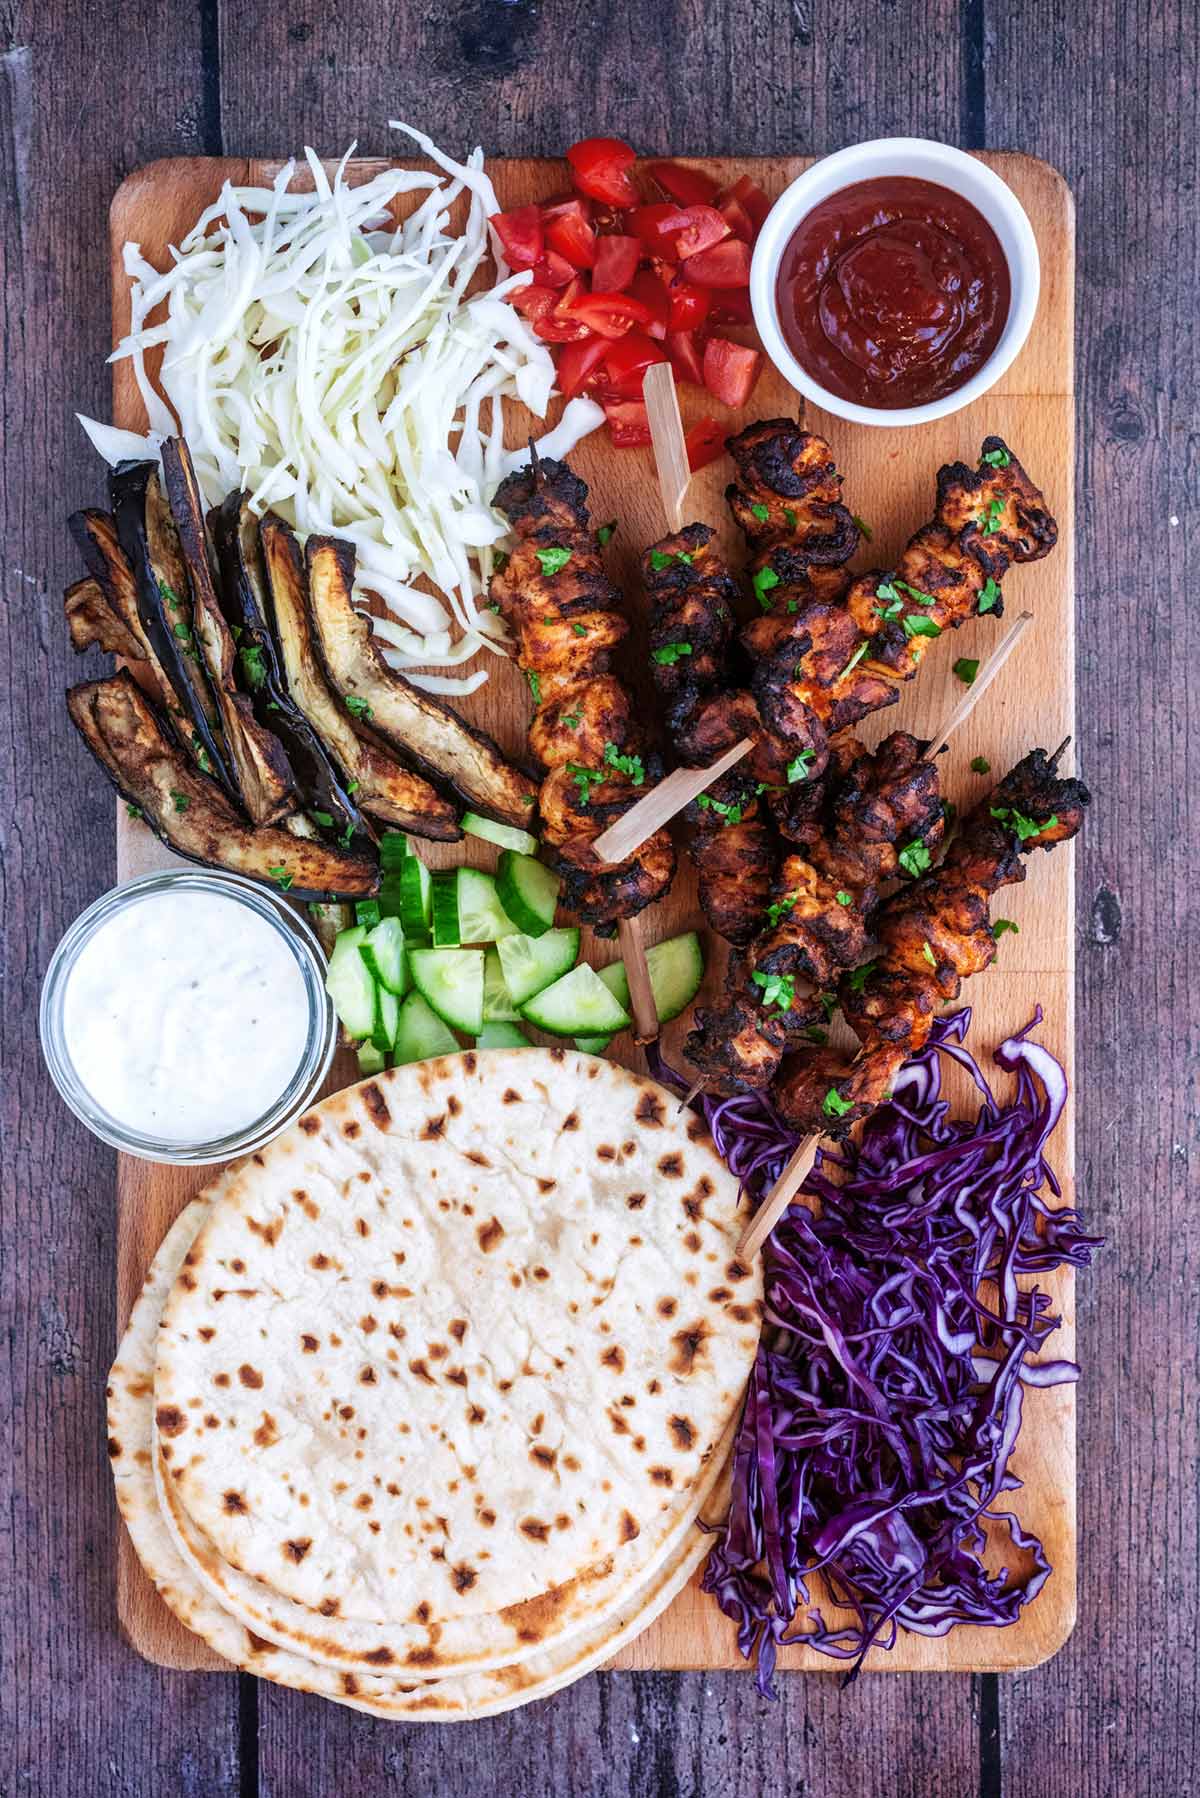 A large serving board with chicken kebabs, flatbreads, vegetables and sauces.